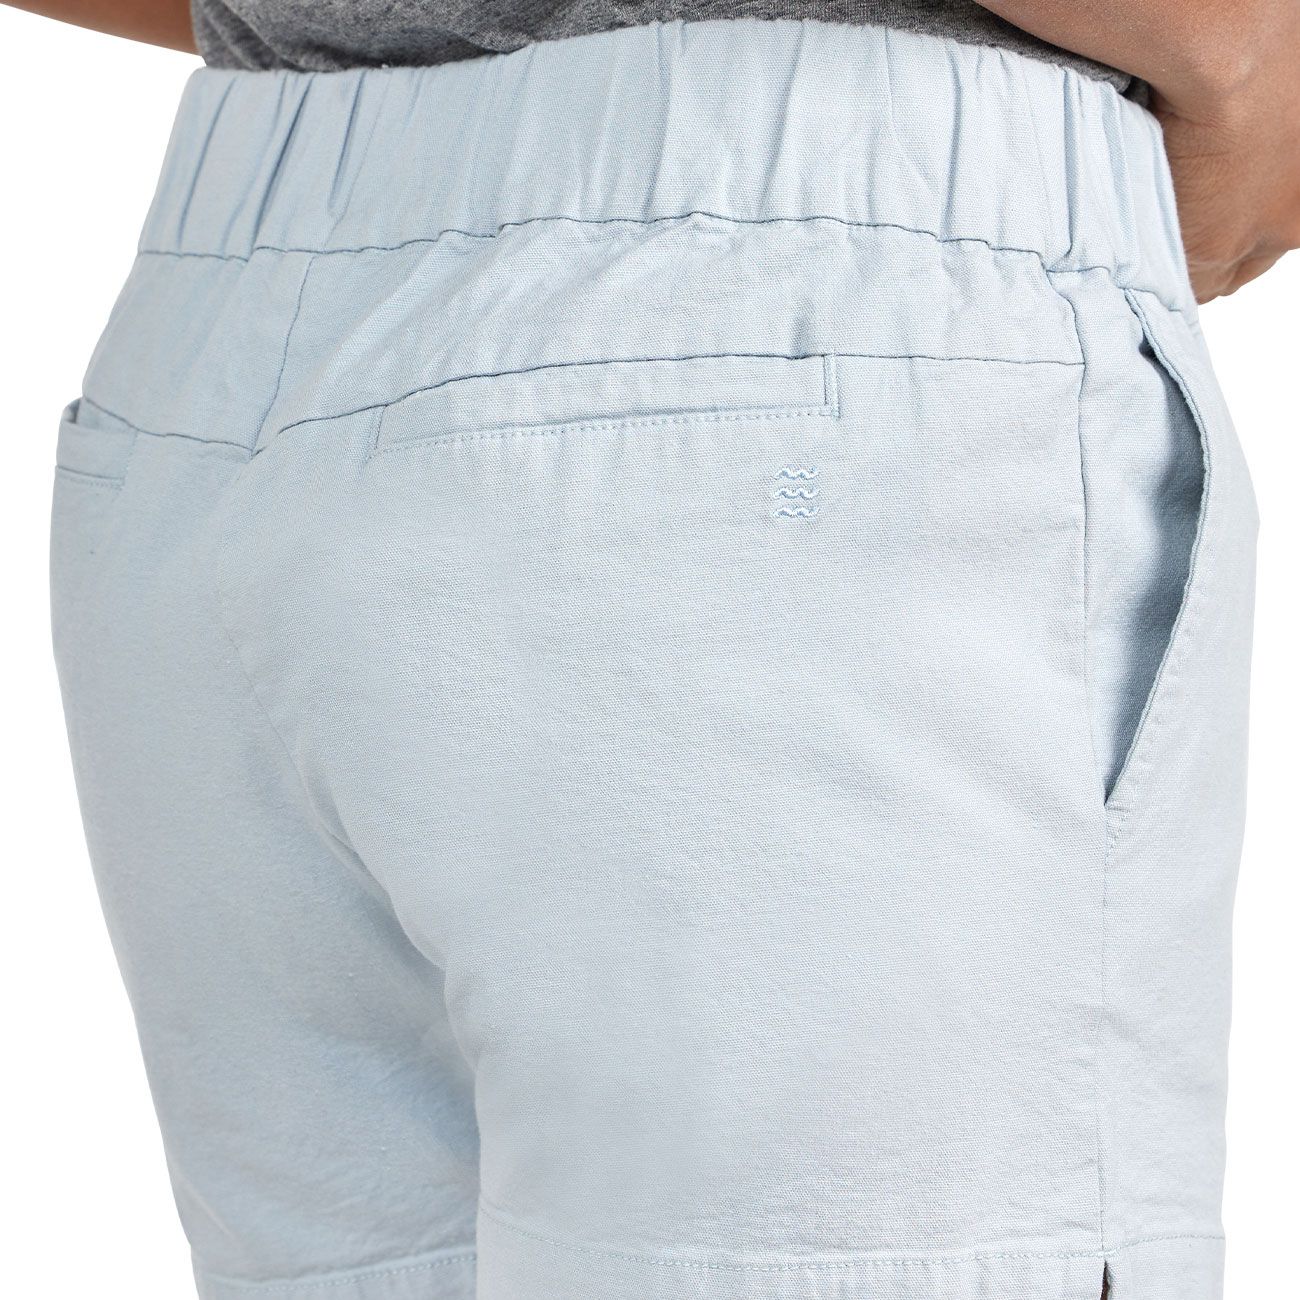 Free Fly Women's Stretch Canvas Short Bay Blue Image 2